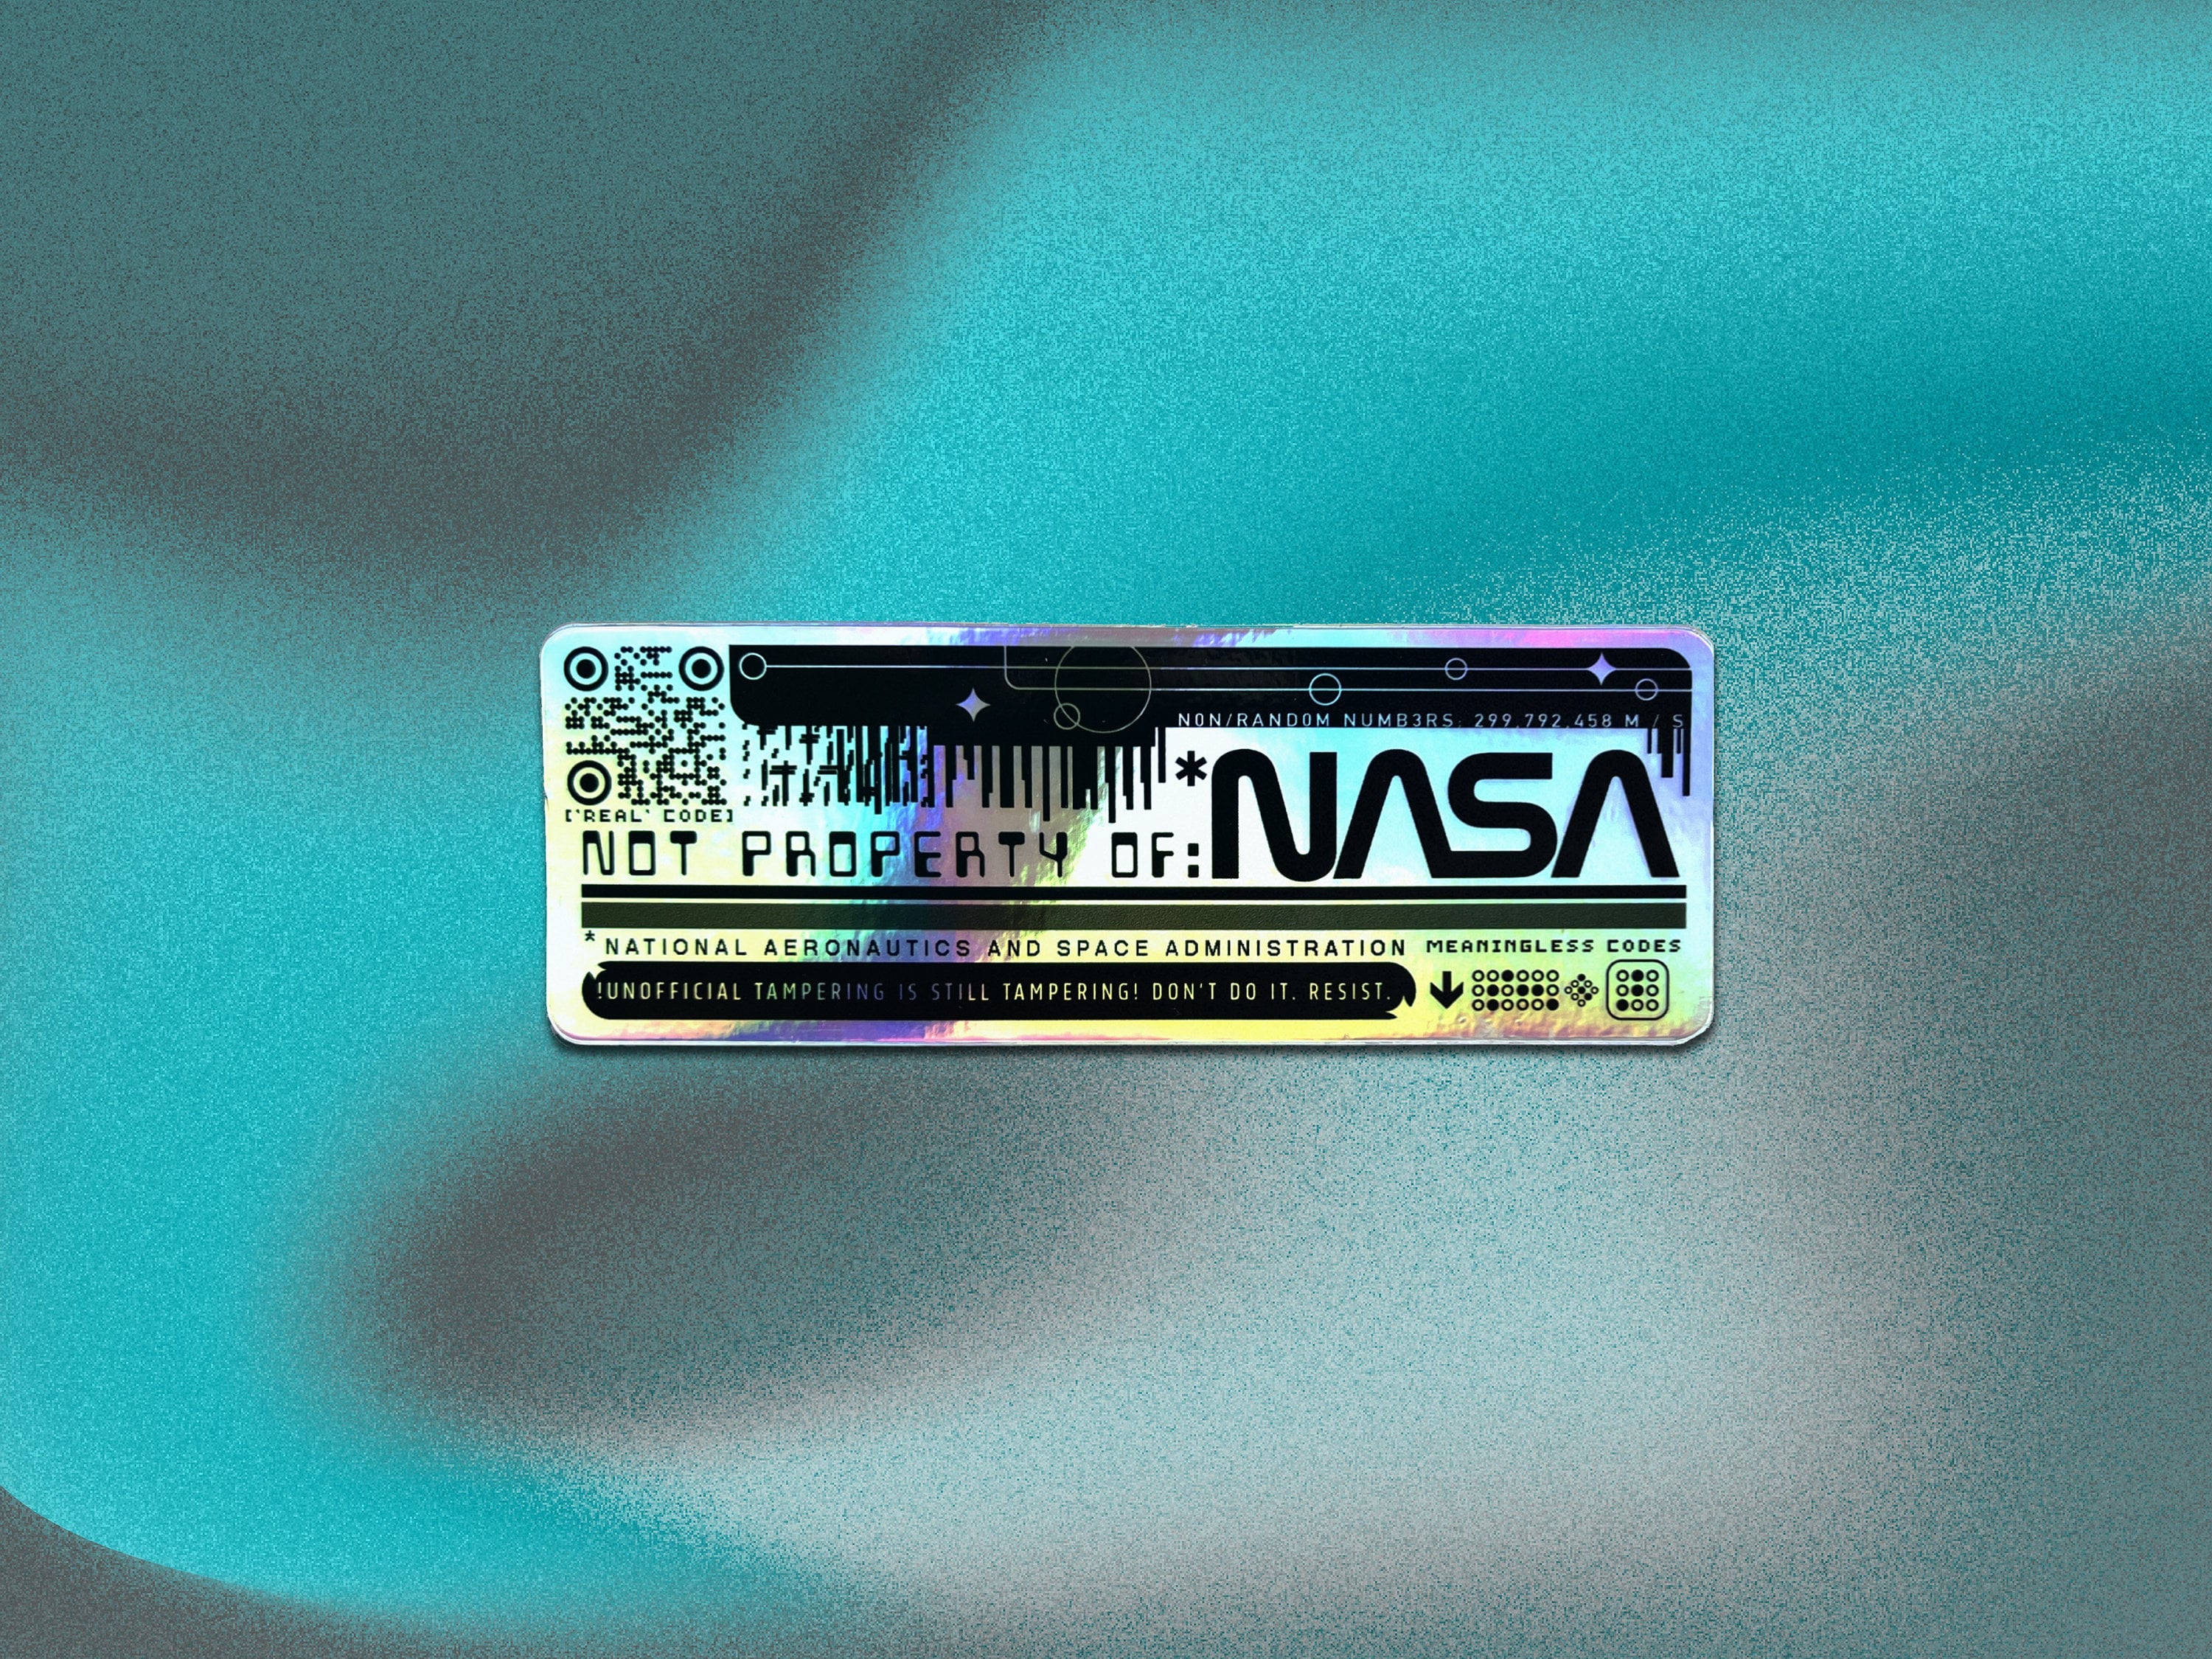 The Sciencey Holographic Astropunk -Cyberpunk Not Property of NASA Decal Sticker - Sci-Fi Laptop / Bumper Sticker Funny Meme Gift